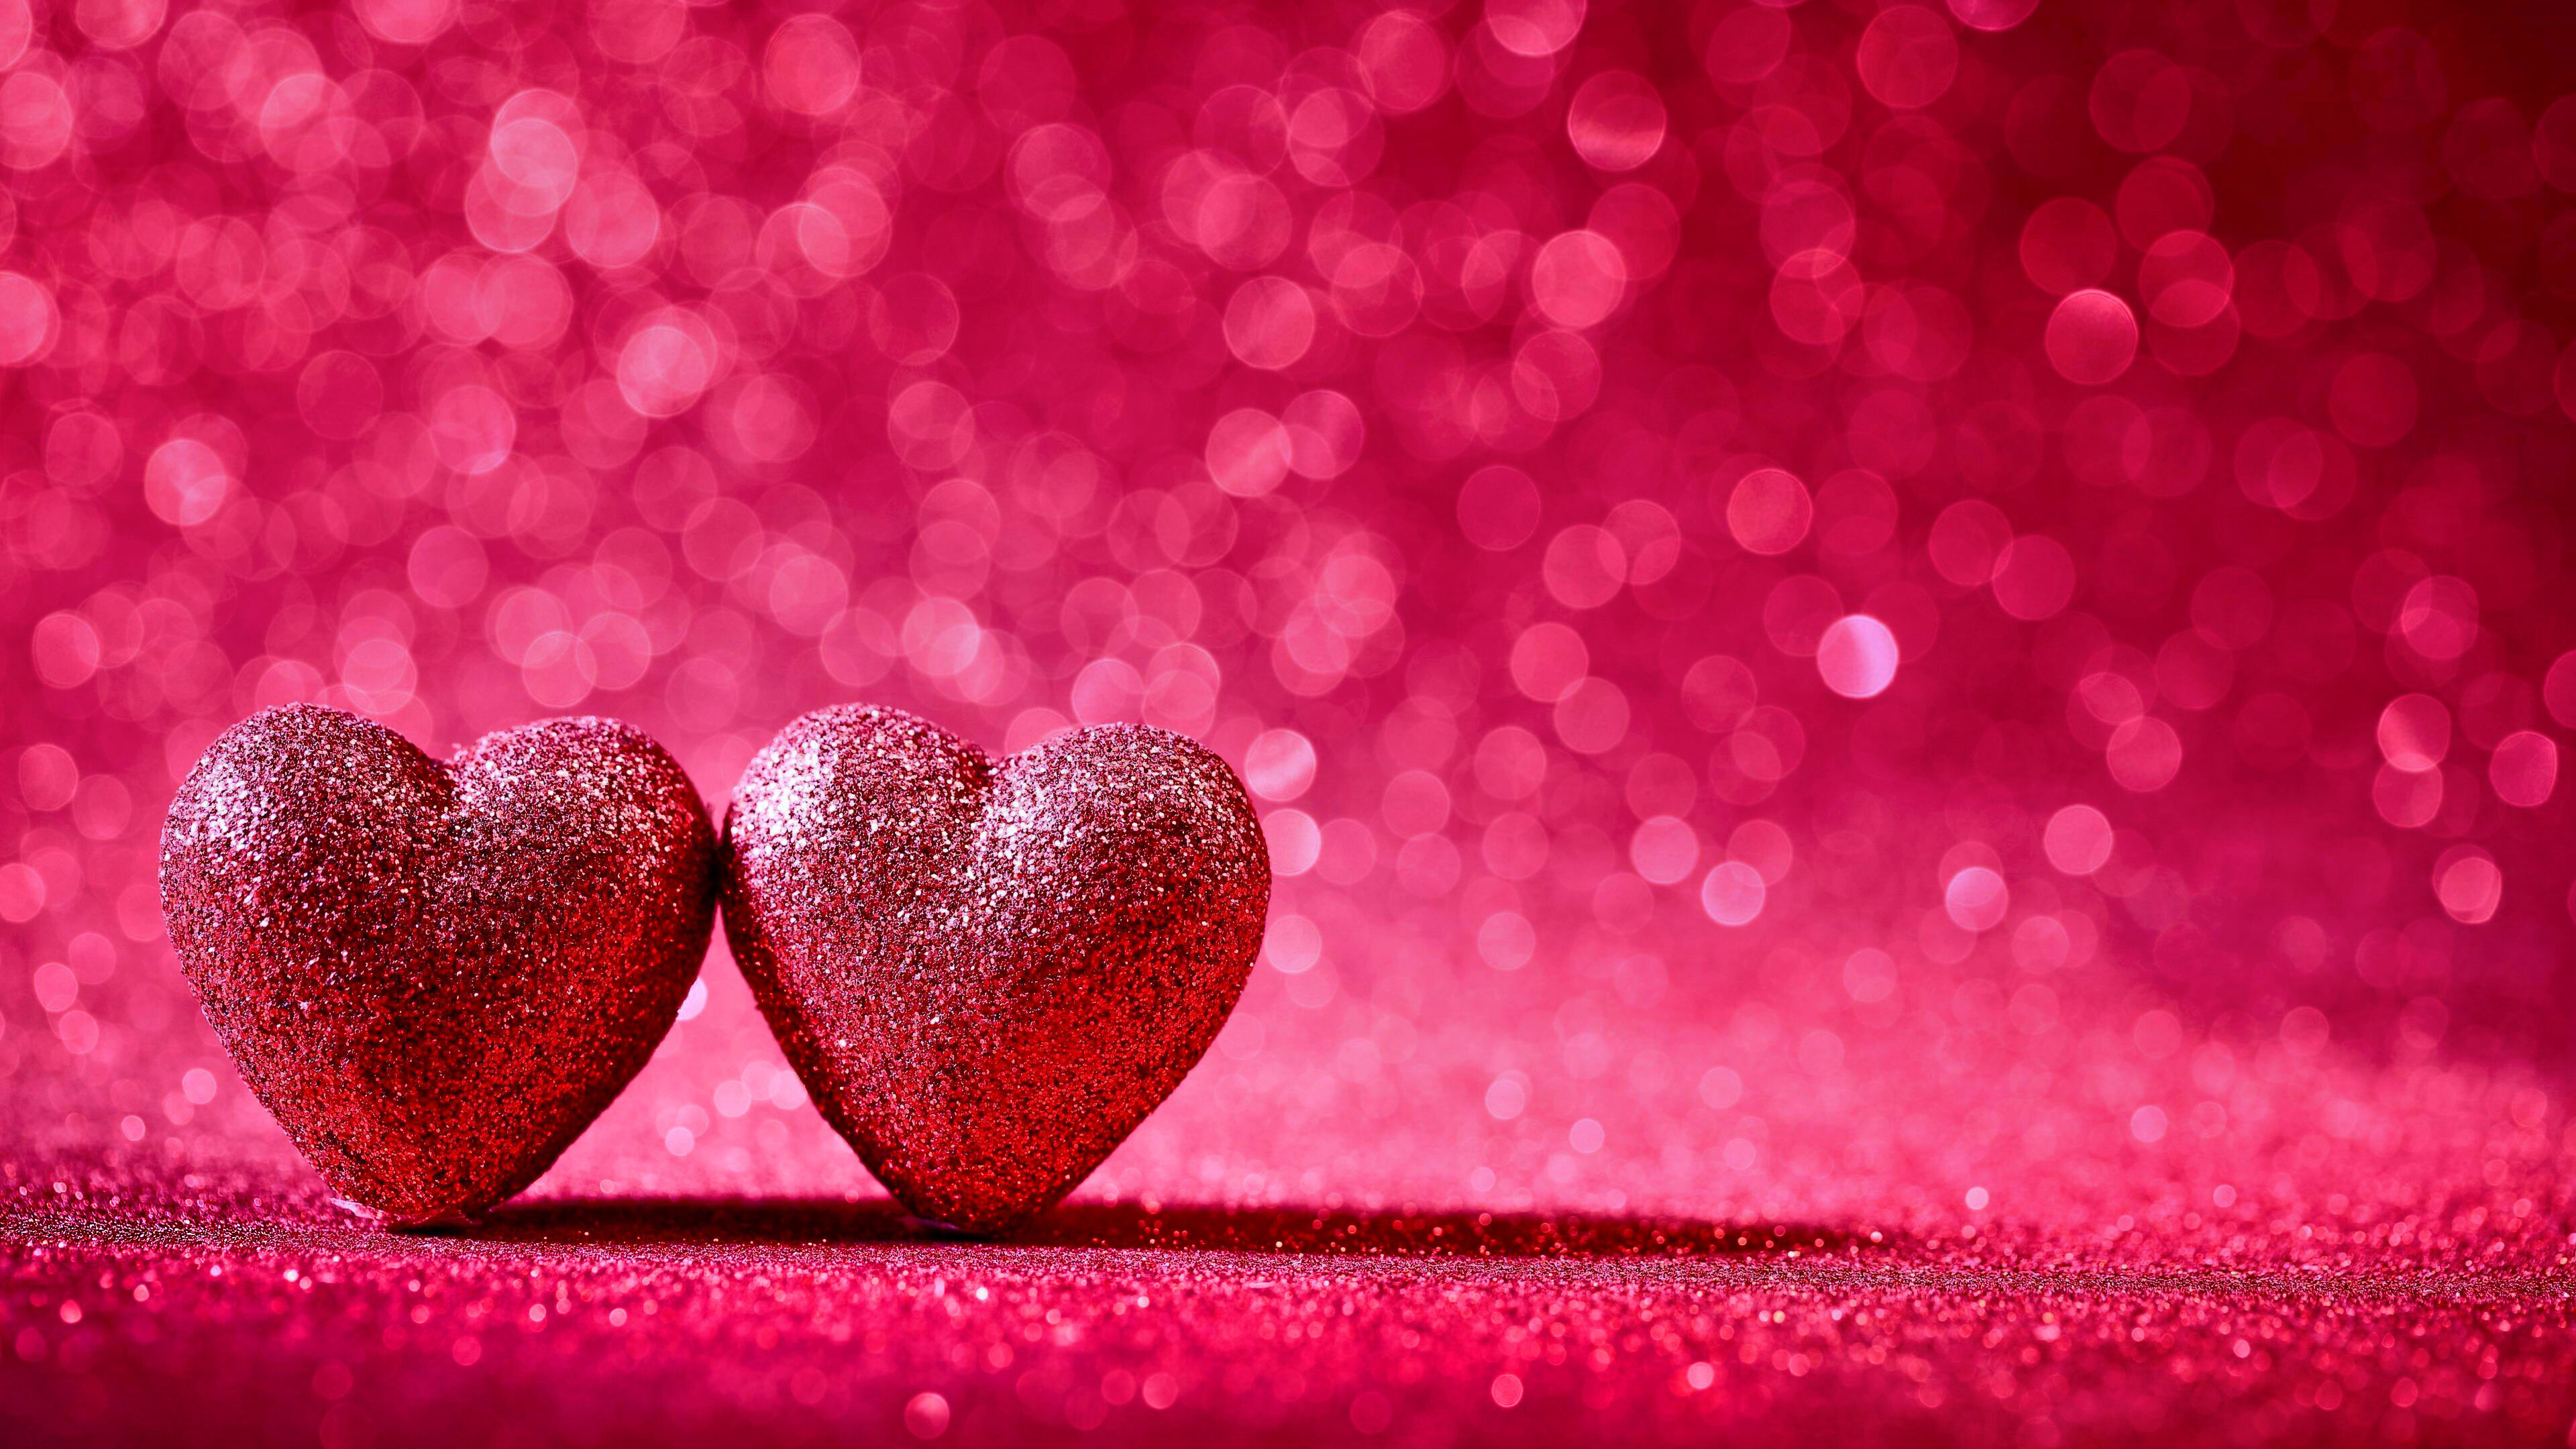 Valentine's Day: Hearts, February 14, Gift-giving. 3840x2160 4K Wallpaper.